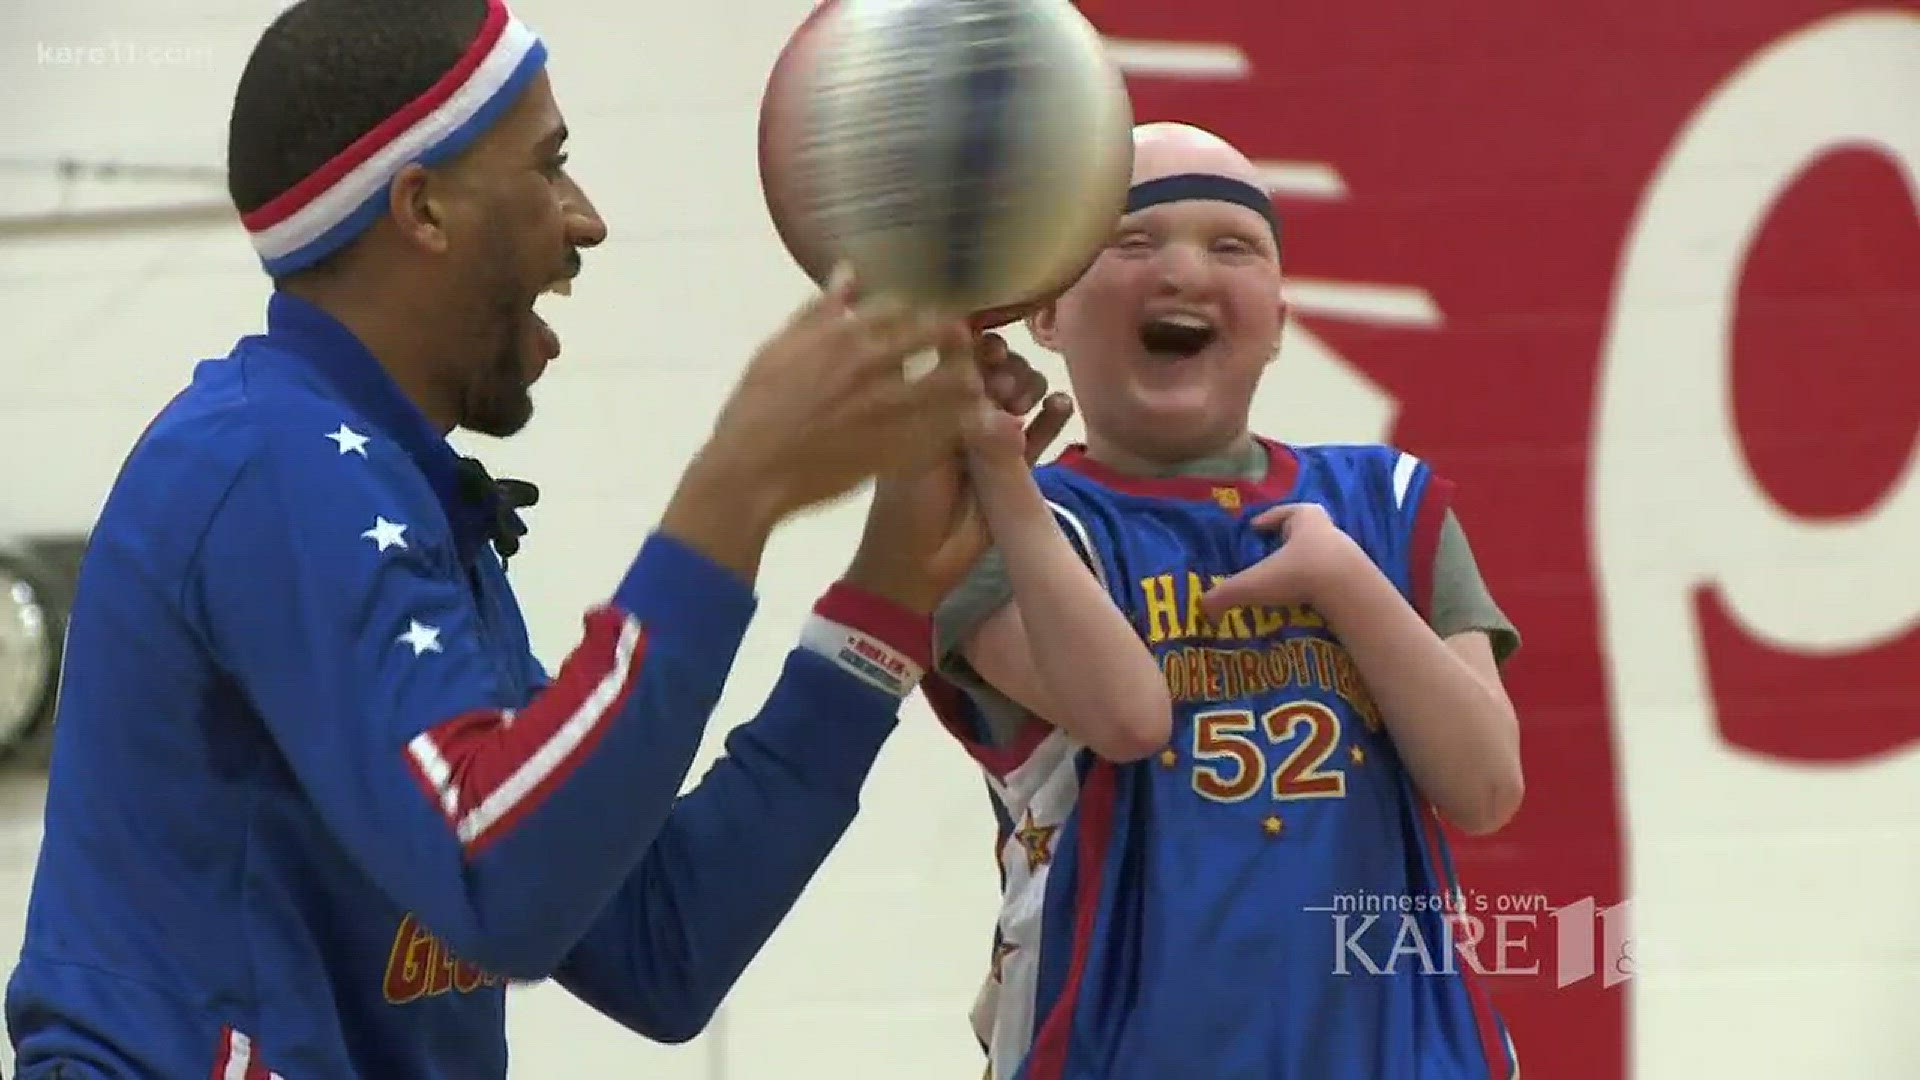 A member of the Harlem Globetrotters stopped by a Prescott school -- with a special surprise for one student. http://kare11.tv/2FWr1hu